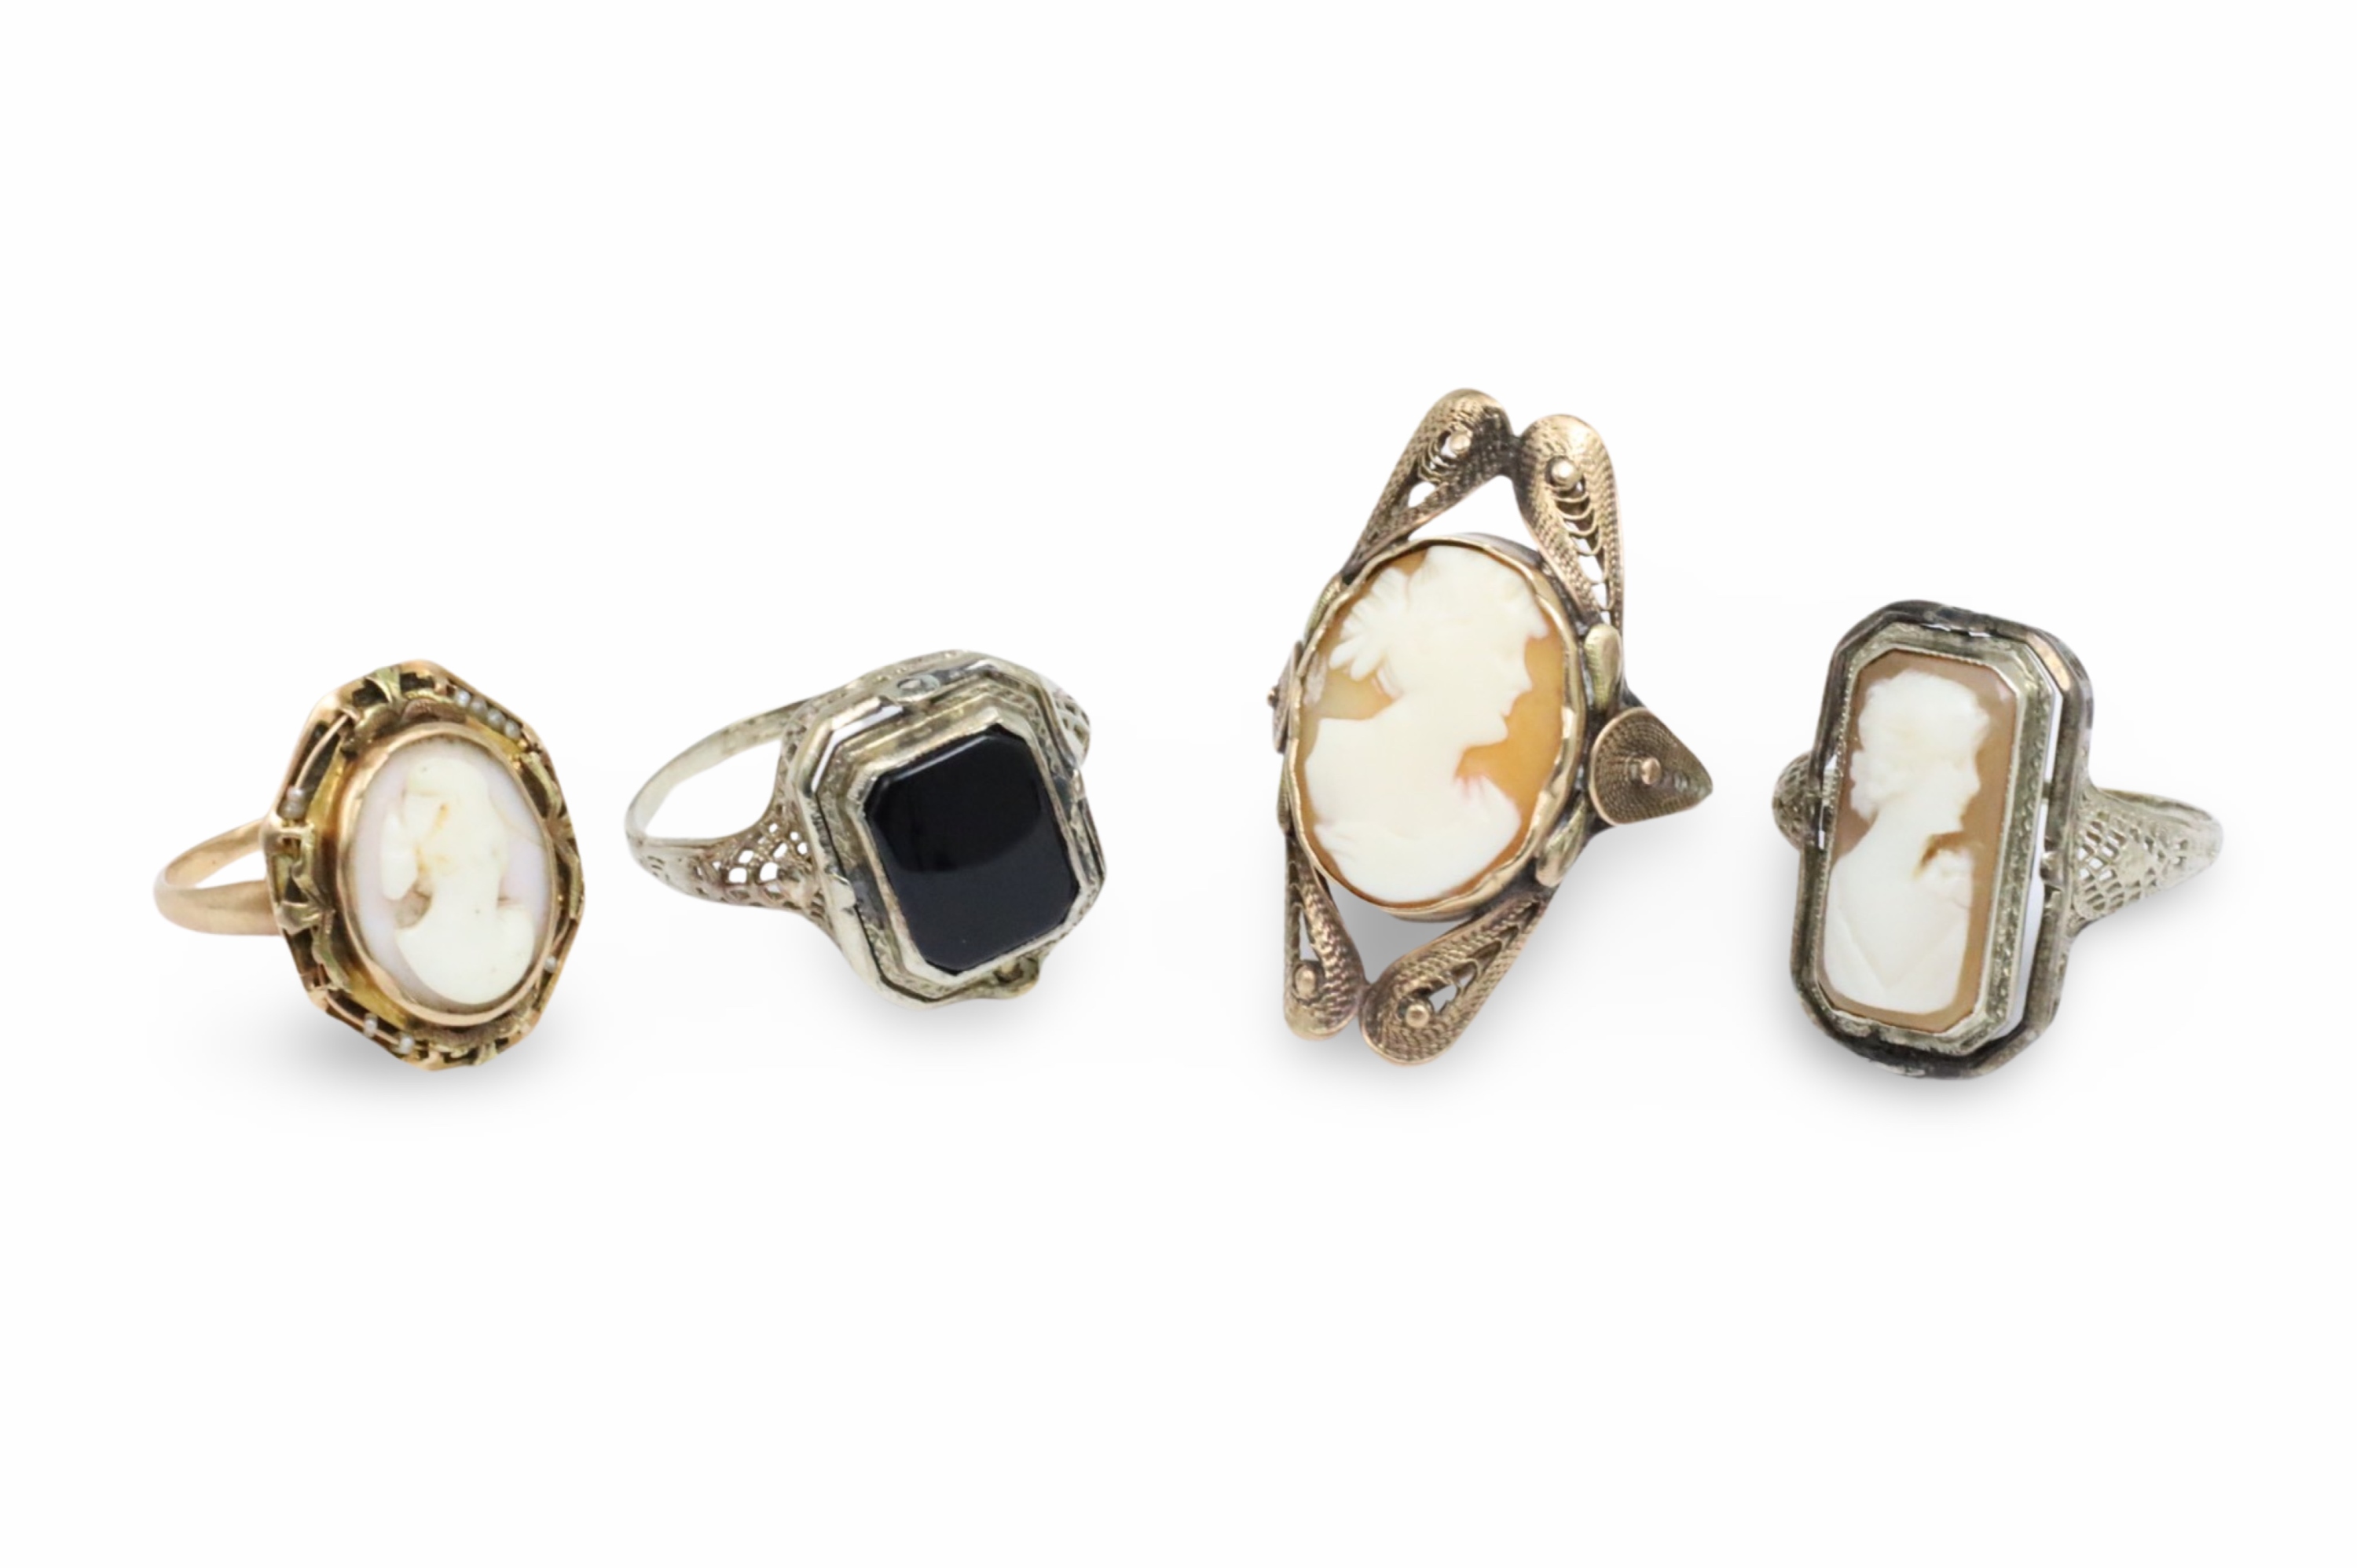 FOUR CAMEO AND SWIVEL RINGS Group